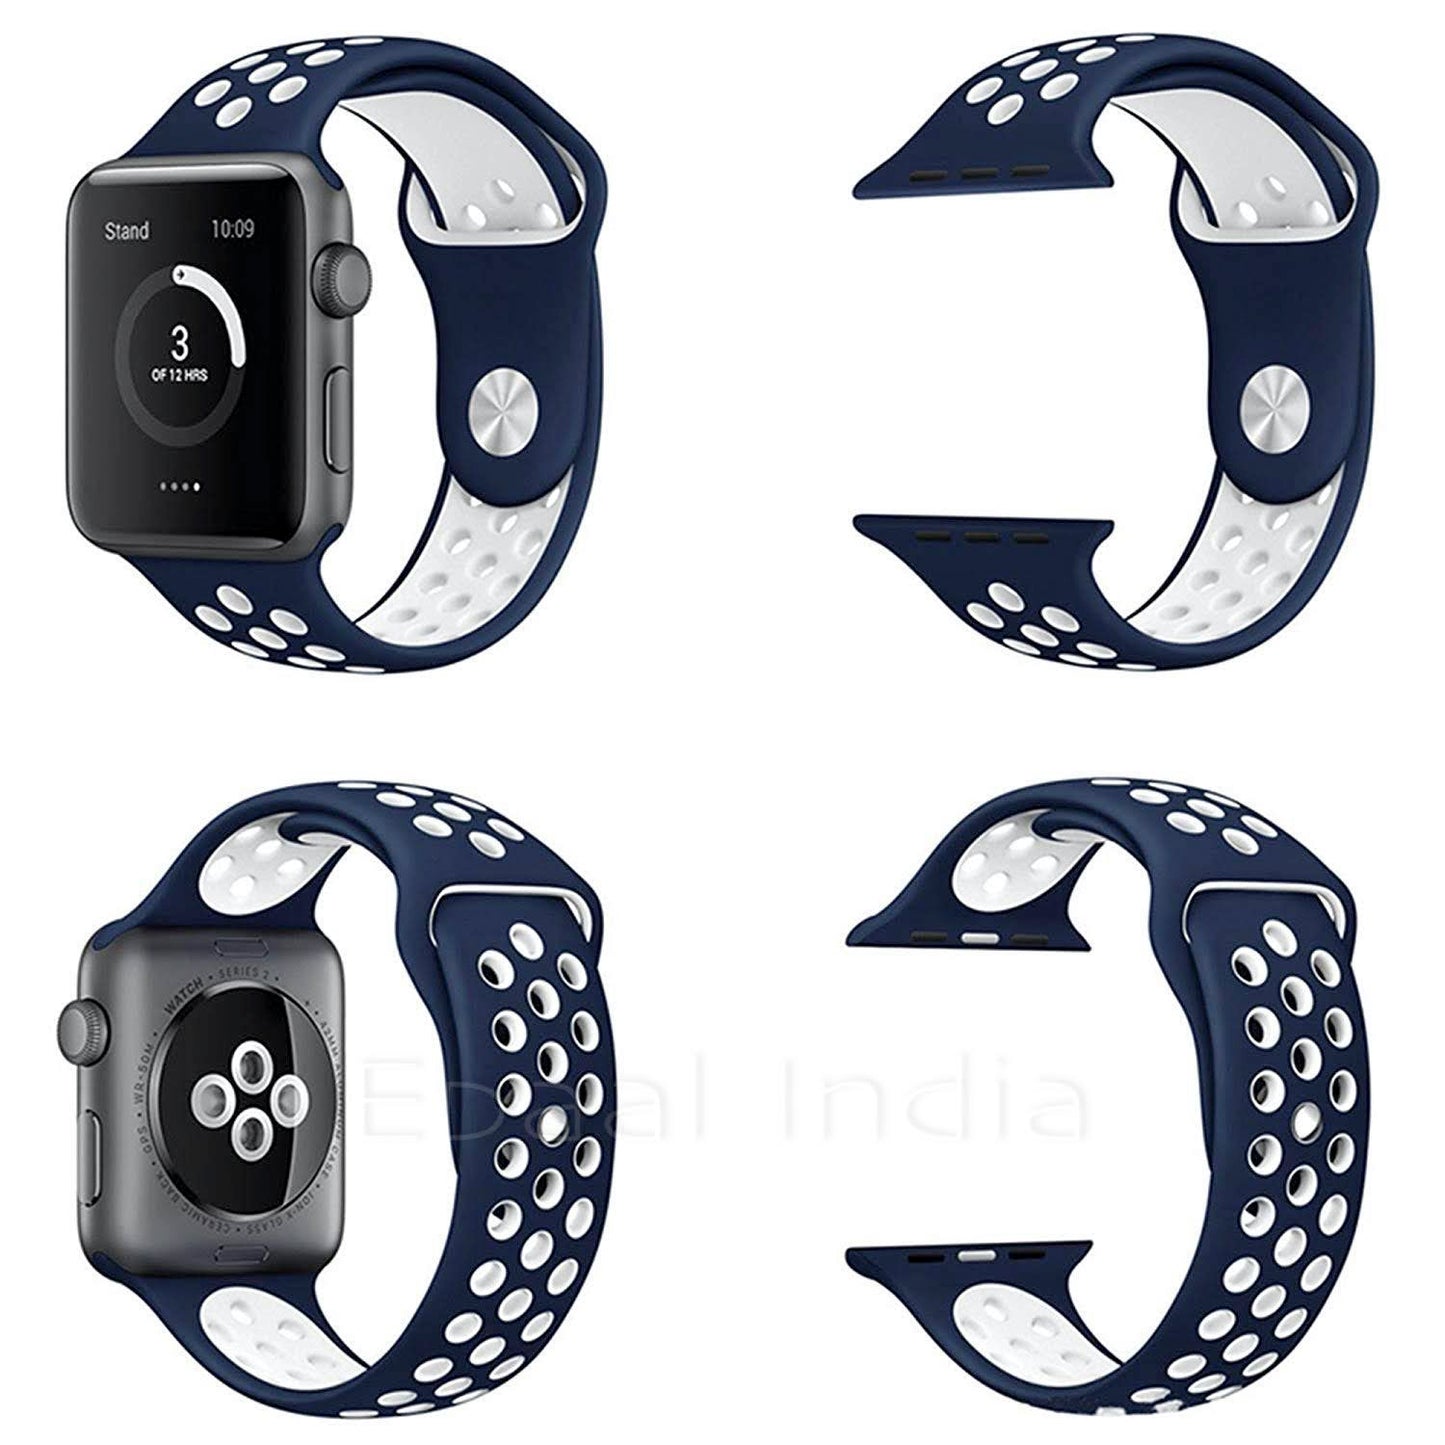 Epaal Breathable Sports Silicone Strap for Apple iWatch Series 4/5 [42mm / 44mm]